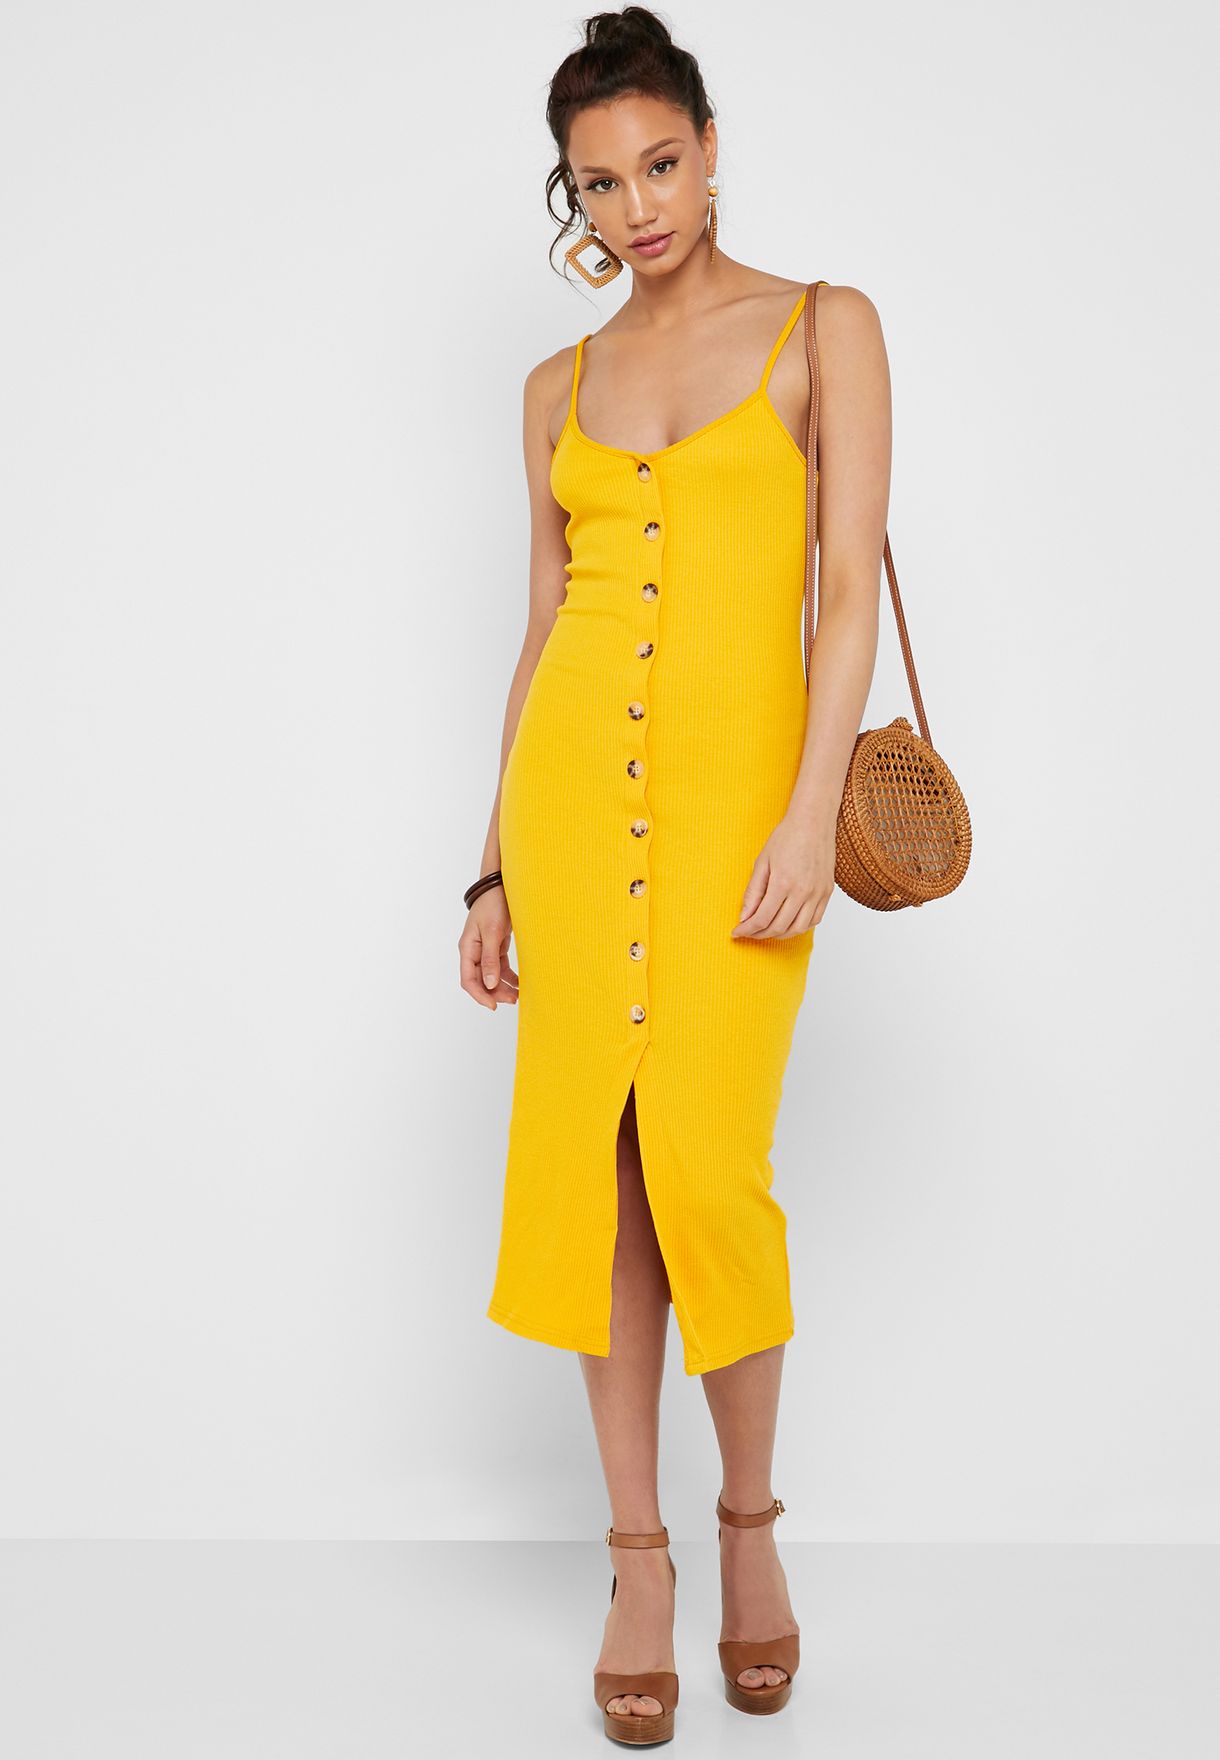 yellow dress with buttons down the front